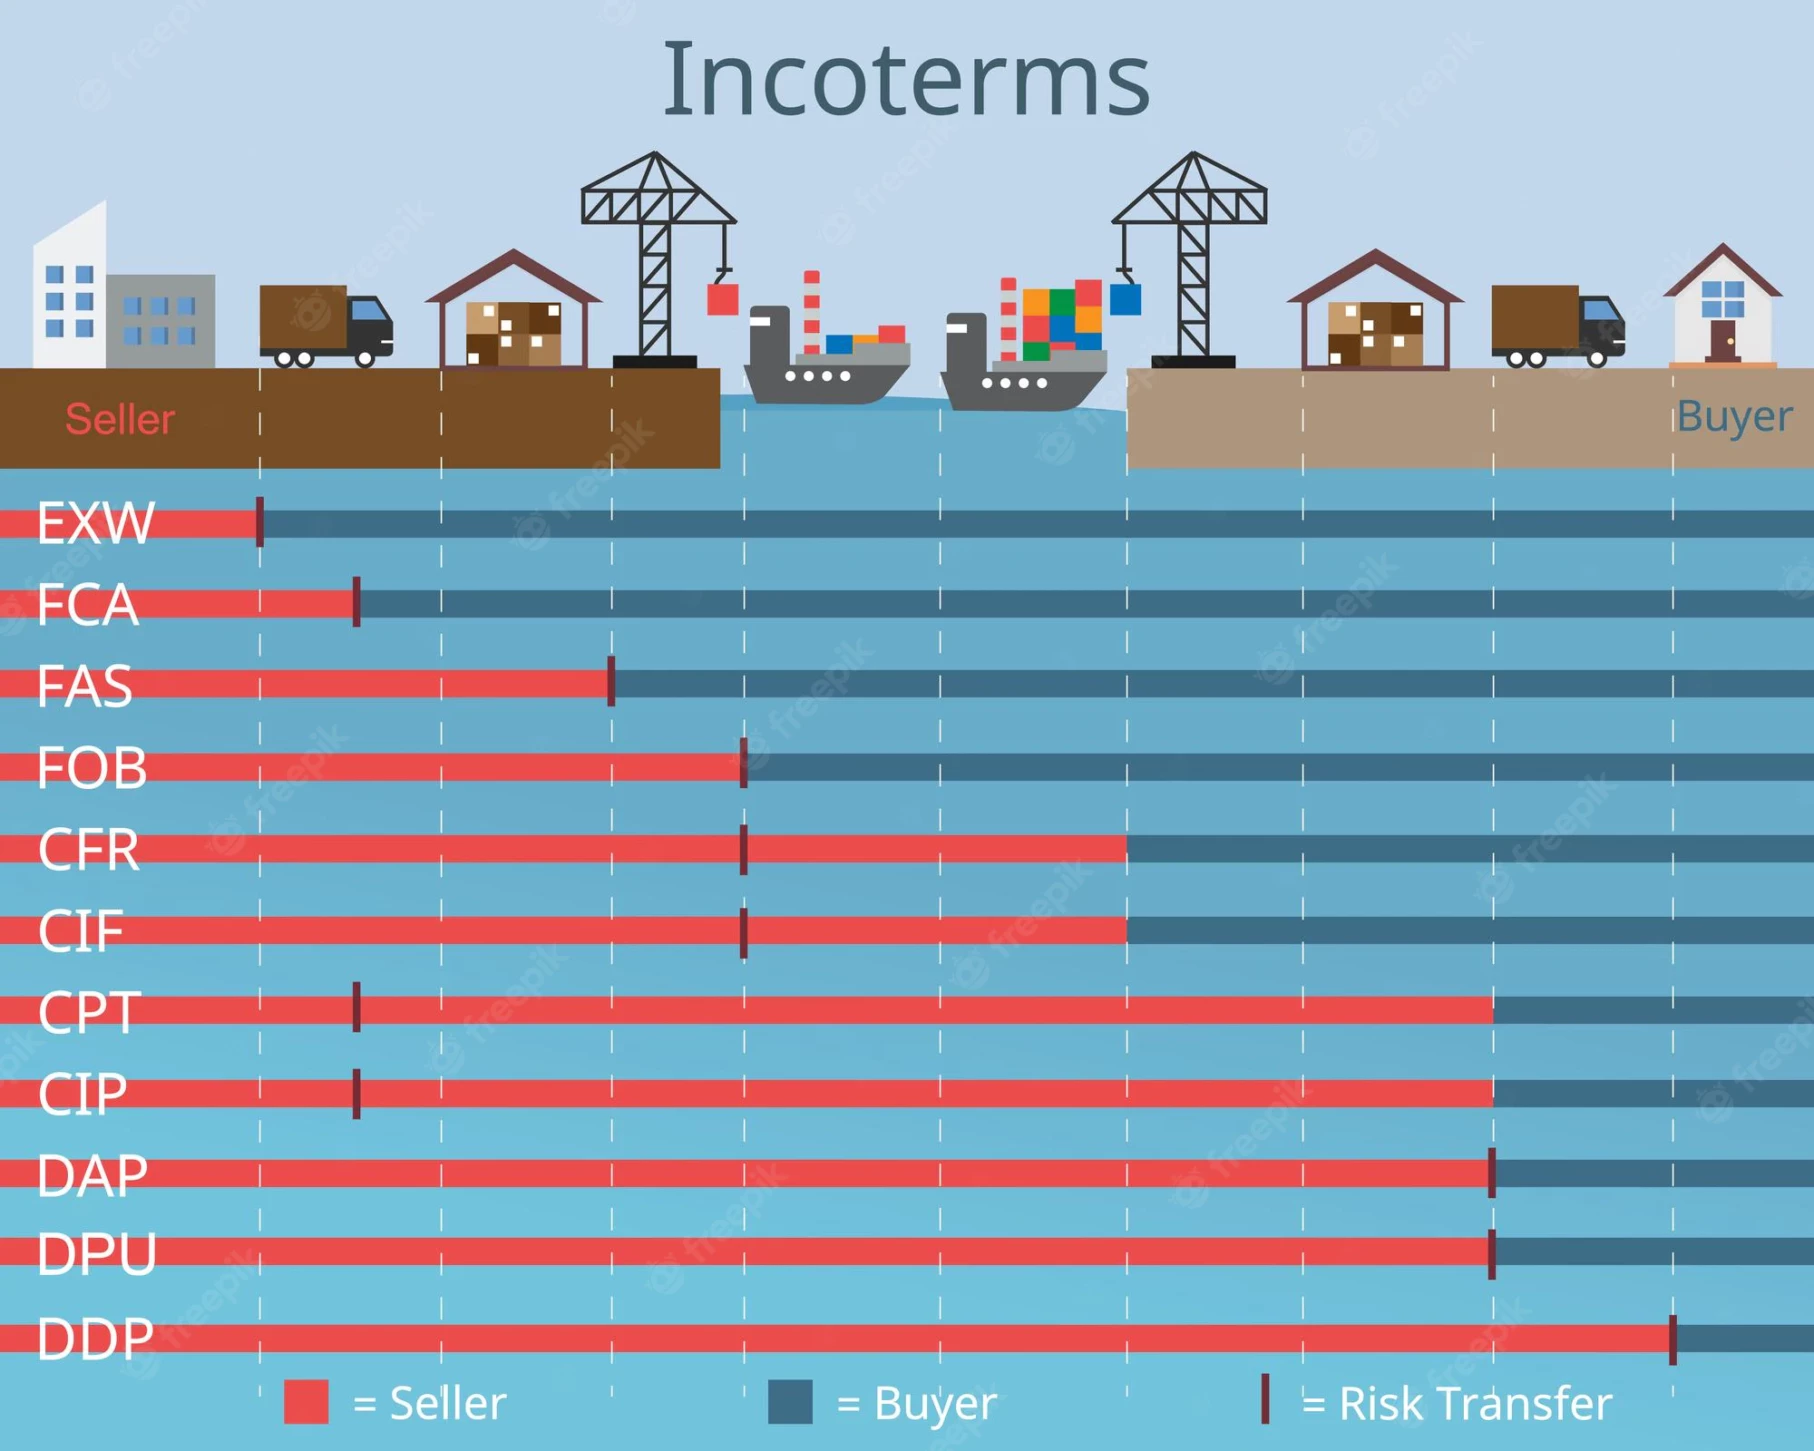 Cif Vs Cip Incoterms Explained Icontainers 41 Off 1039